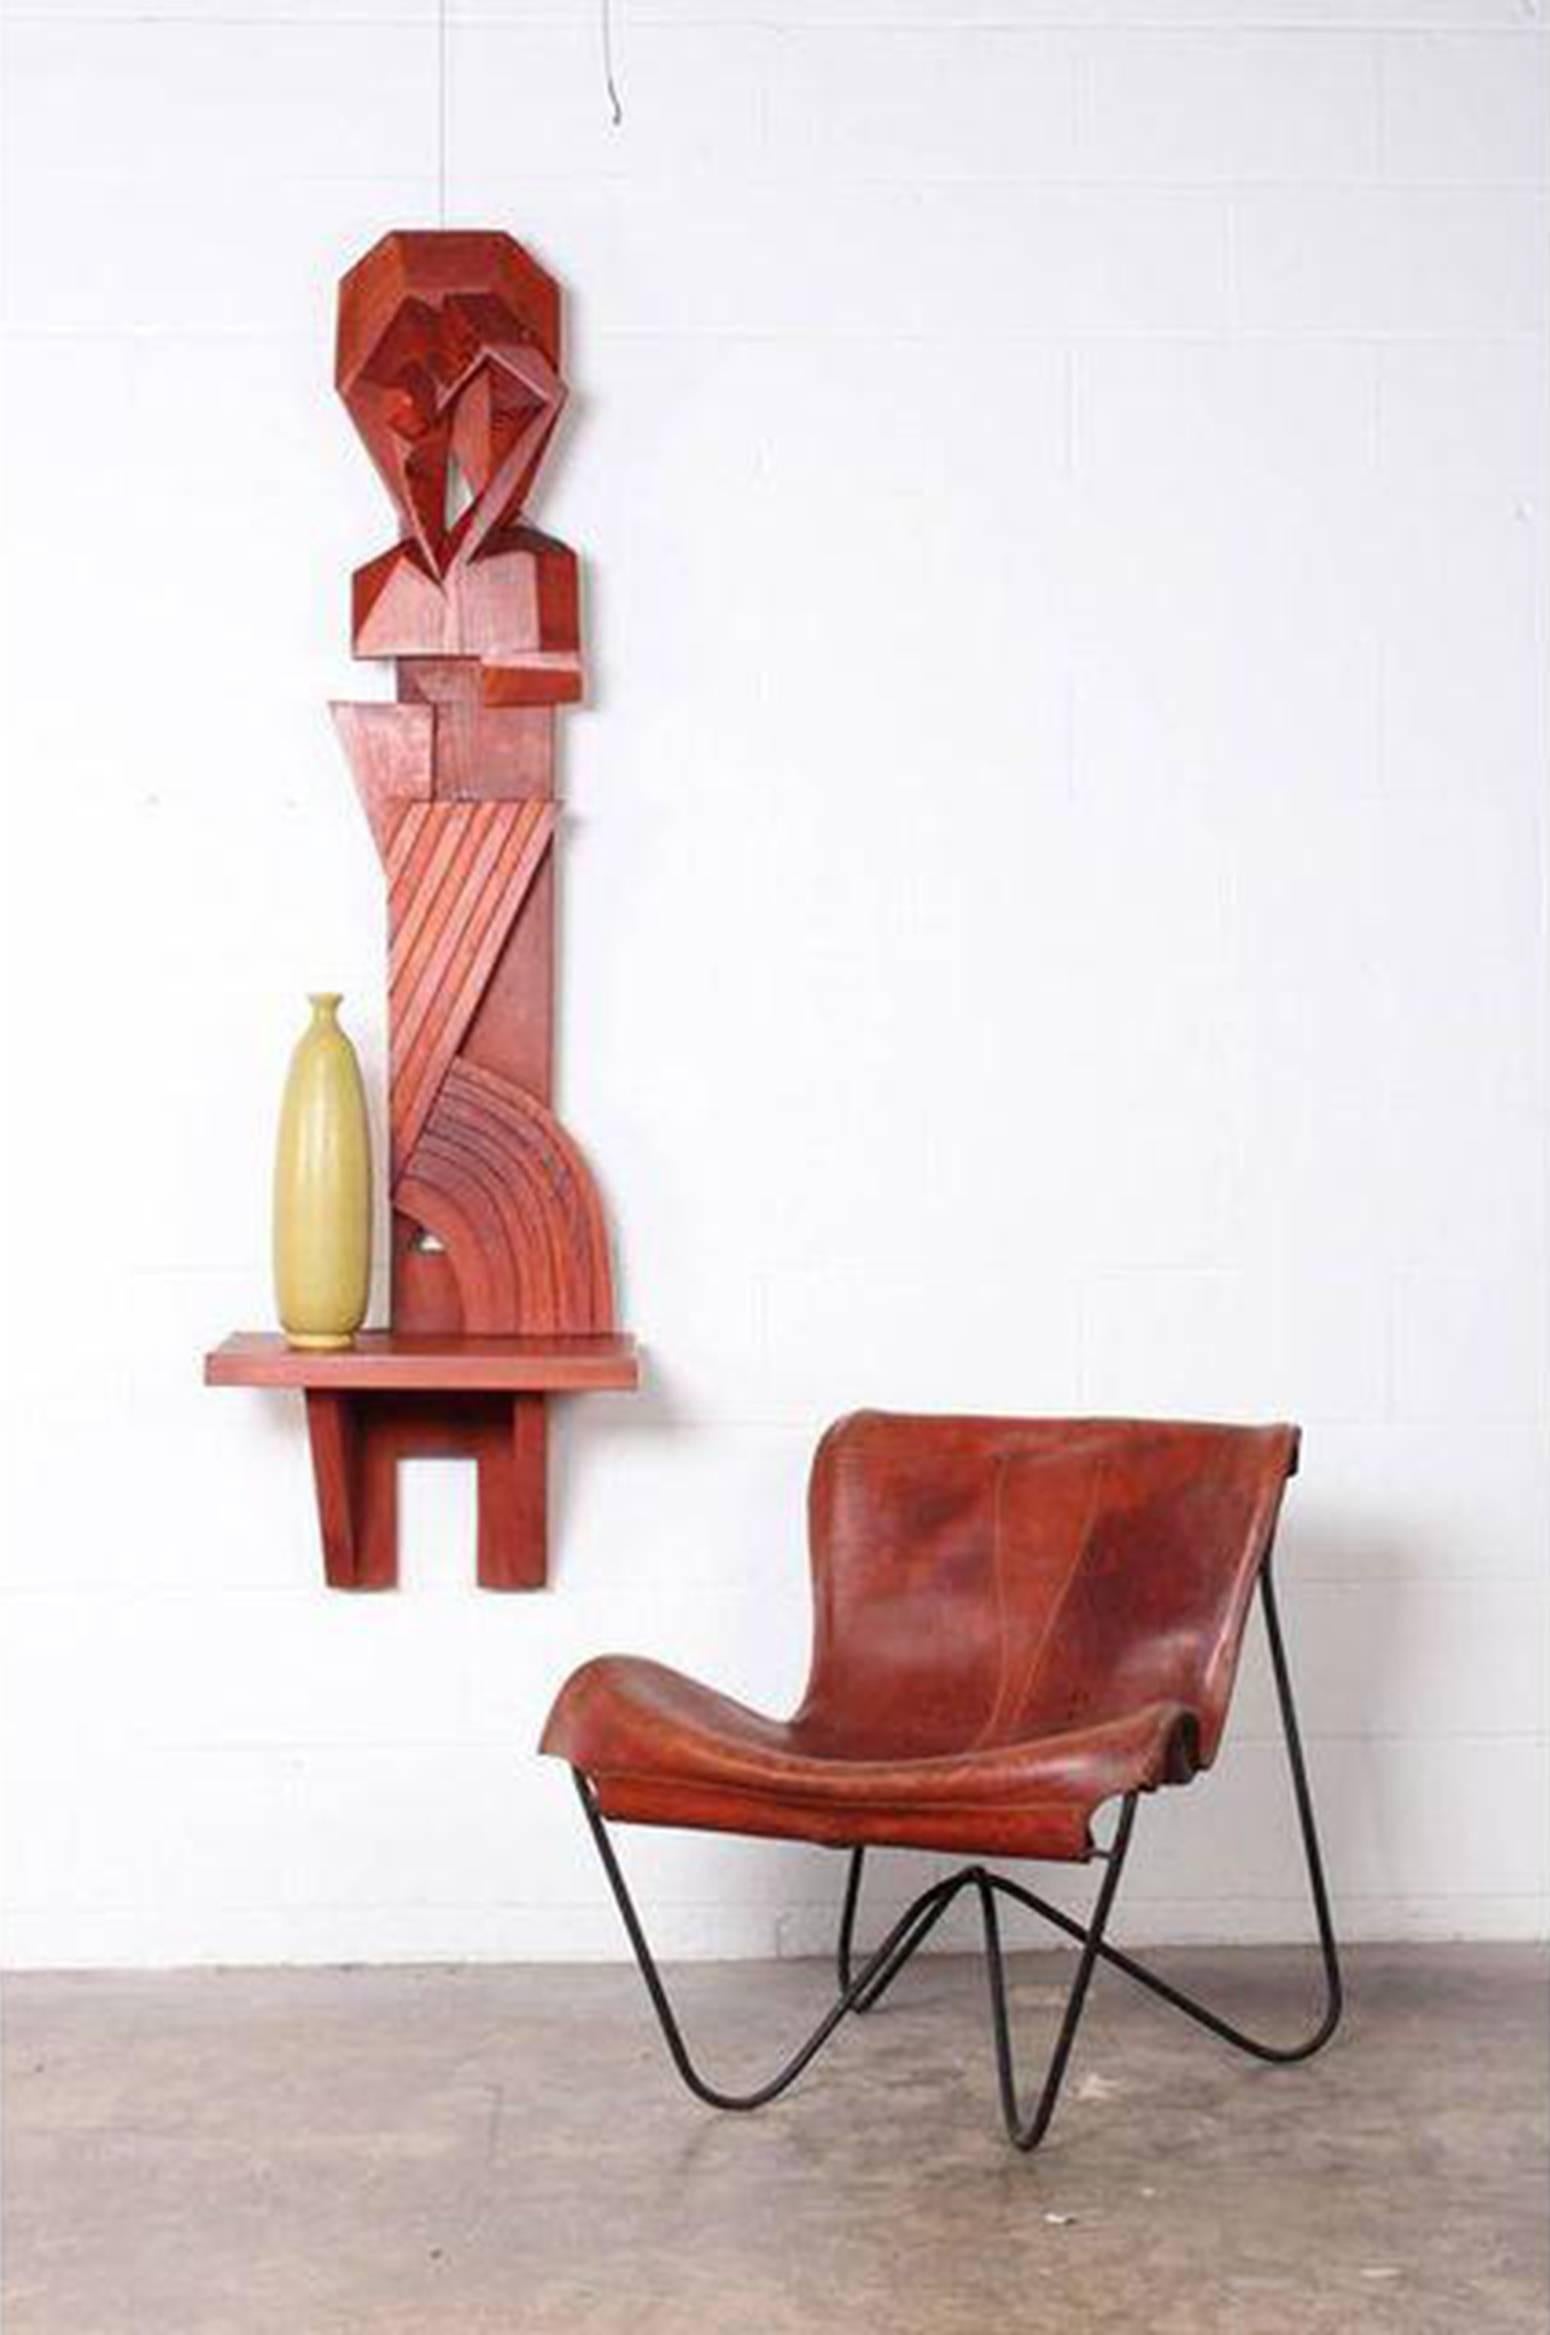 Deco Seat I - Brown Abstract Sculpture by Unknown